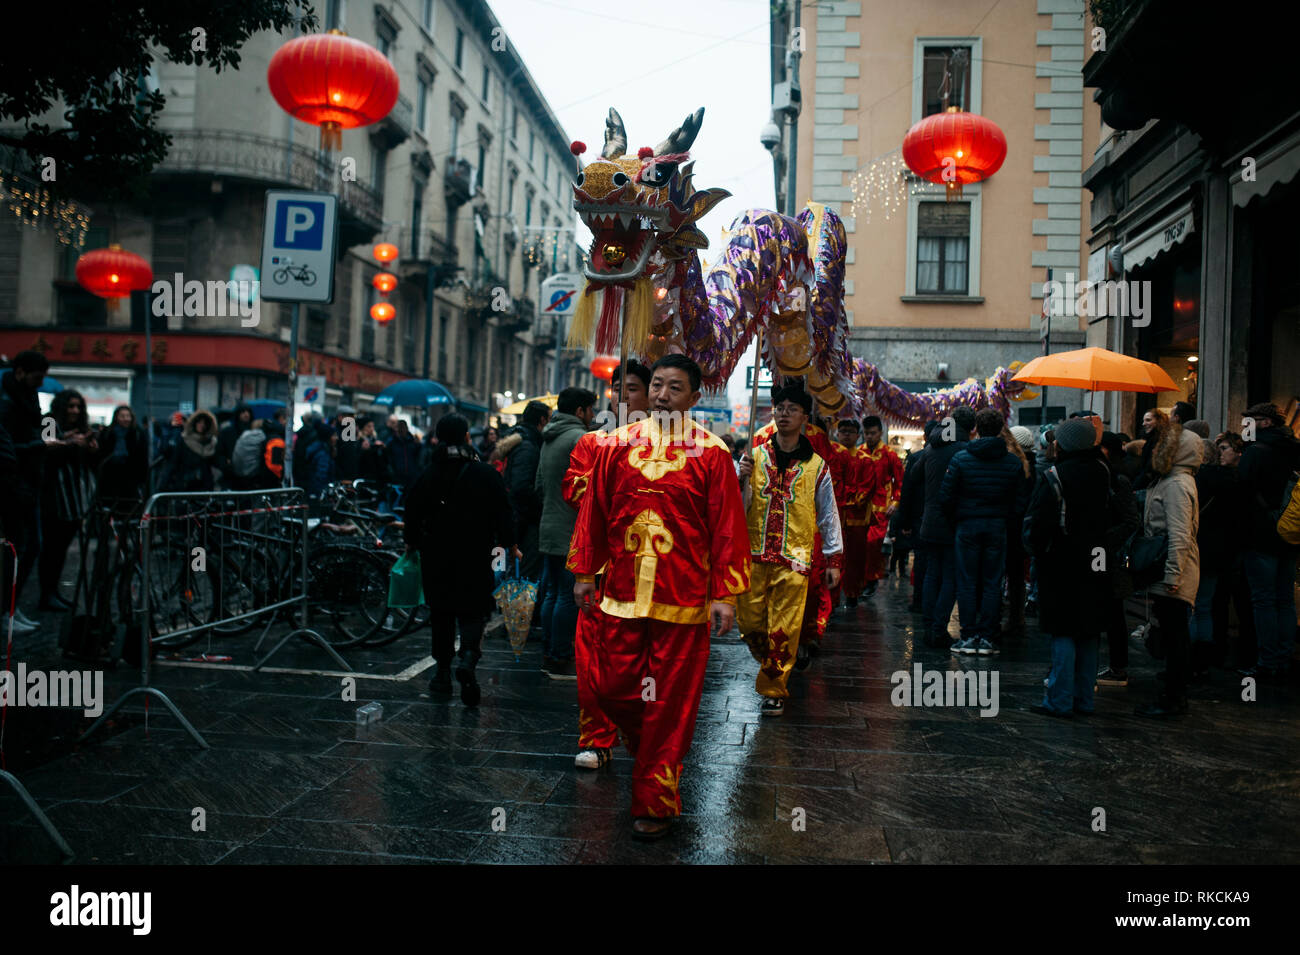 Performers are seen going back to the Chinese Cultural Center during the parade. The Chinese community in Milan celebrates the New Year with colourful parades, Golden Dragon Parade and the Chinese lion dance. According to the Chinese Zodiac, the New Year is dedicated to the pig; so banners and cards depicting the pig decorated Via Sarpi and its neighbourhoods, also known as Milan’s Chinatown. Giuseppe Sala, Mayor of Milano, and Mauro Boselli, Head of the Chamber of the Italian Fashion also attended the event. Stock Photo